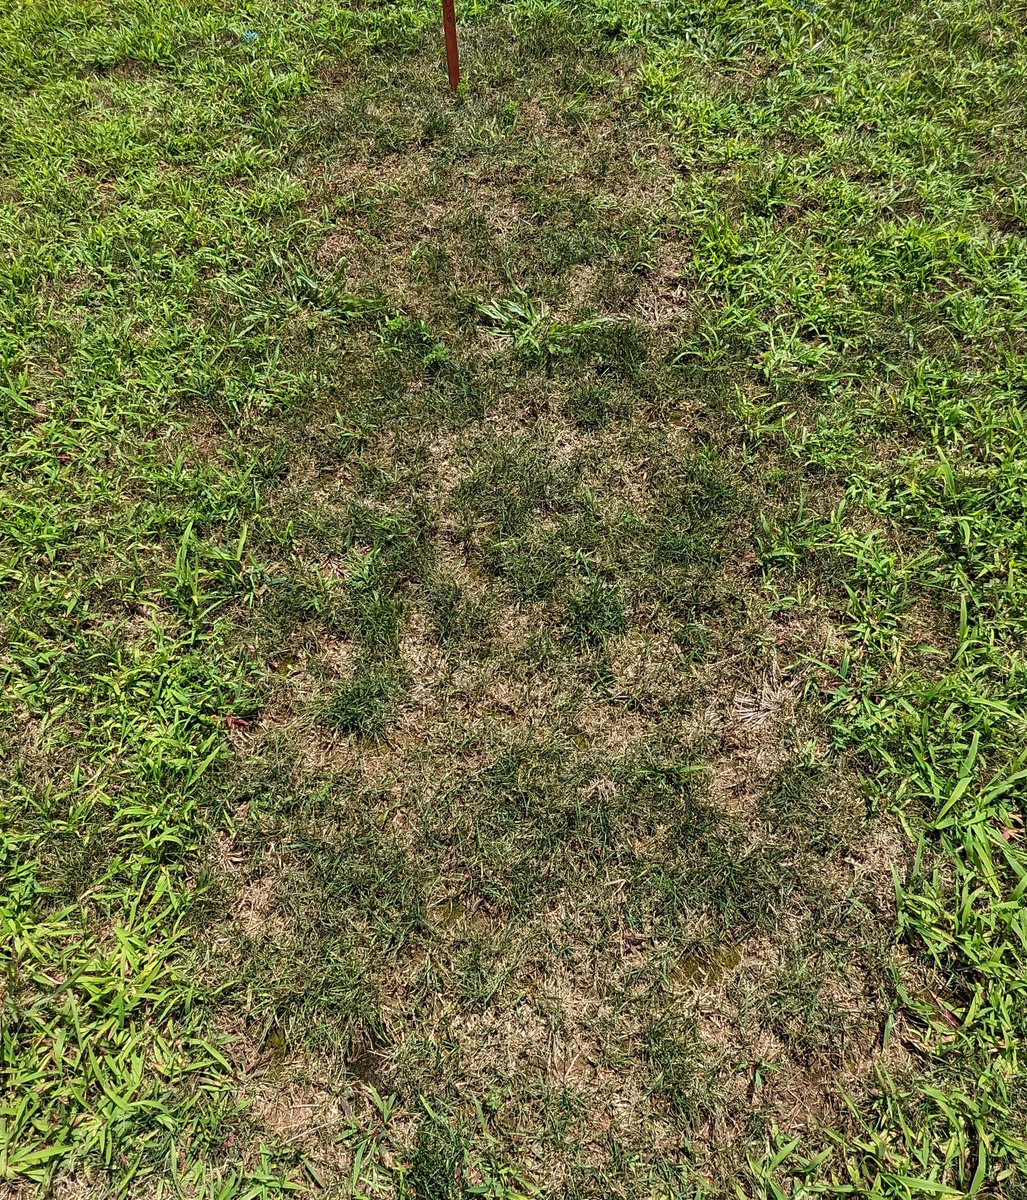 Don't forget to include MSO with quinclorac. Smooth crabgrass control with Drive XLR8 at max rate (64 oz/A) 2 weeks after application in both photos. Right side has MSO at 1% v/v.